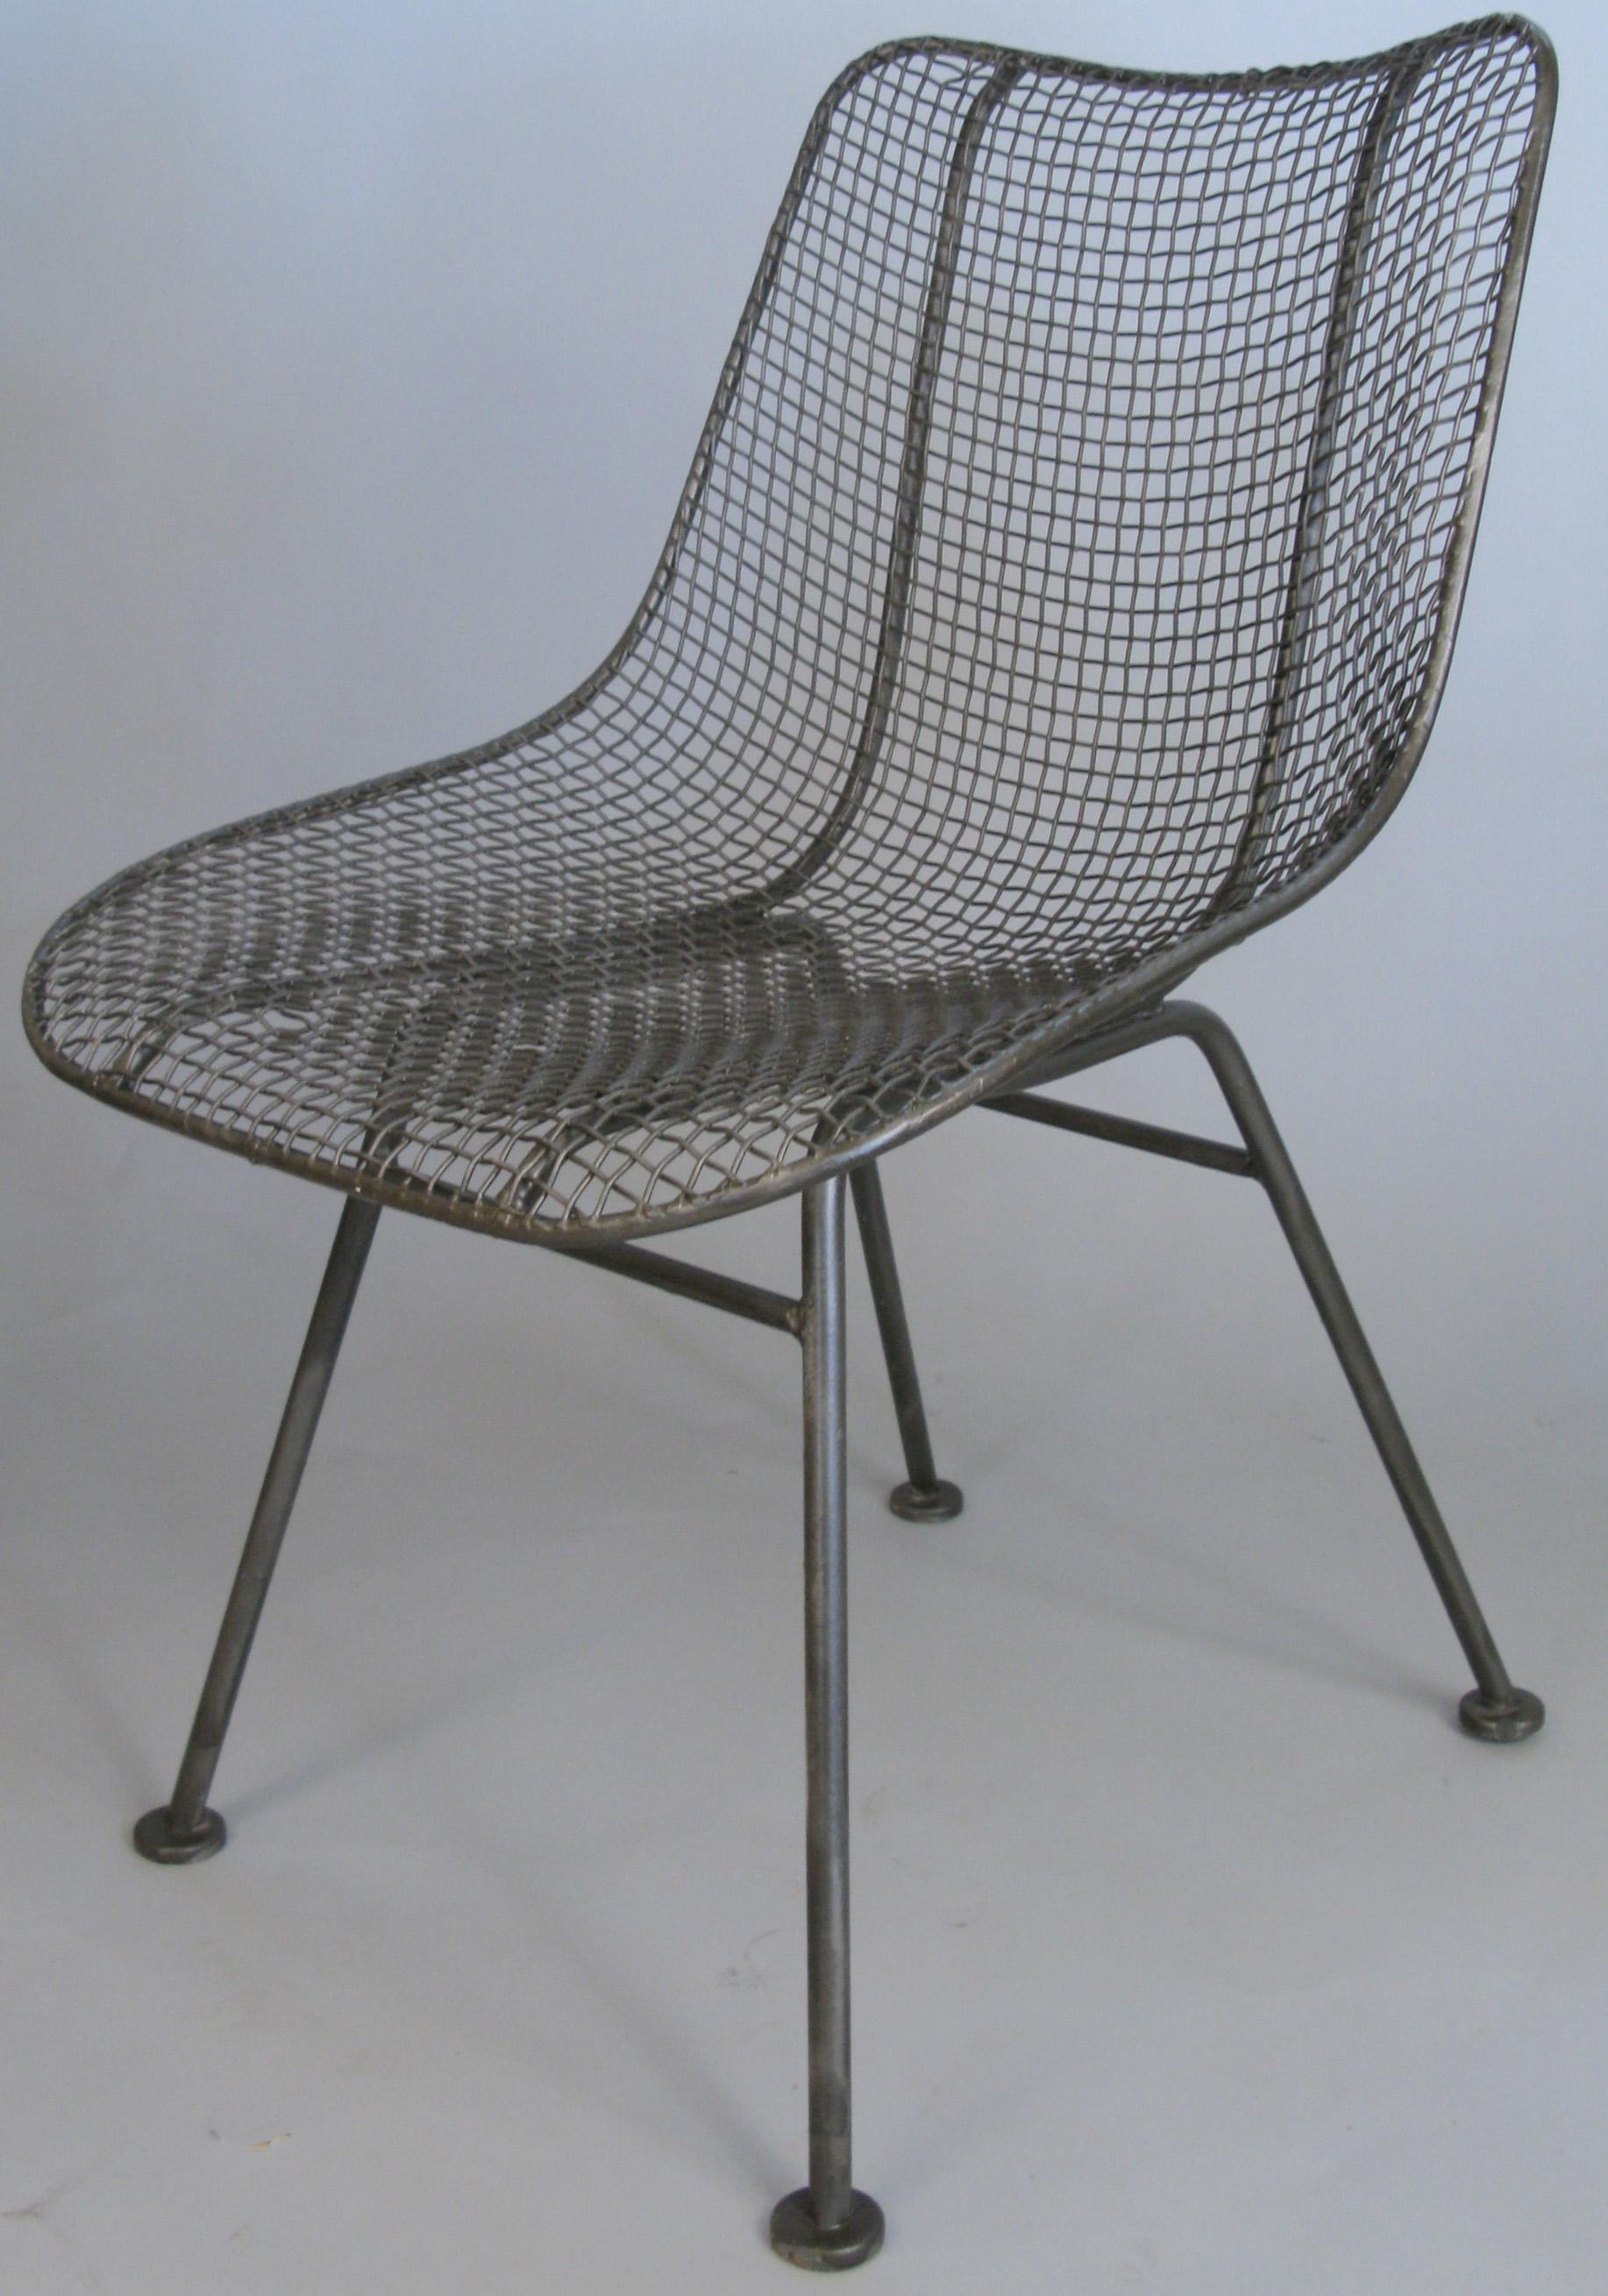 A large set of 20 vintage 1950s Sculptura dining chairs designed by Russell Woodard. Made with a wrought iron frame and woven steel mesh seat. These have been refinished in a greige color, although we can arrange to change them to a color of your